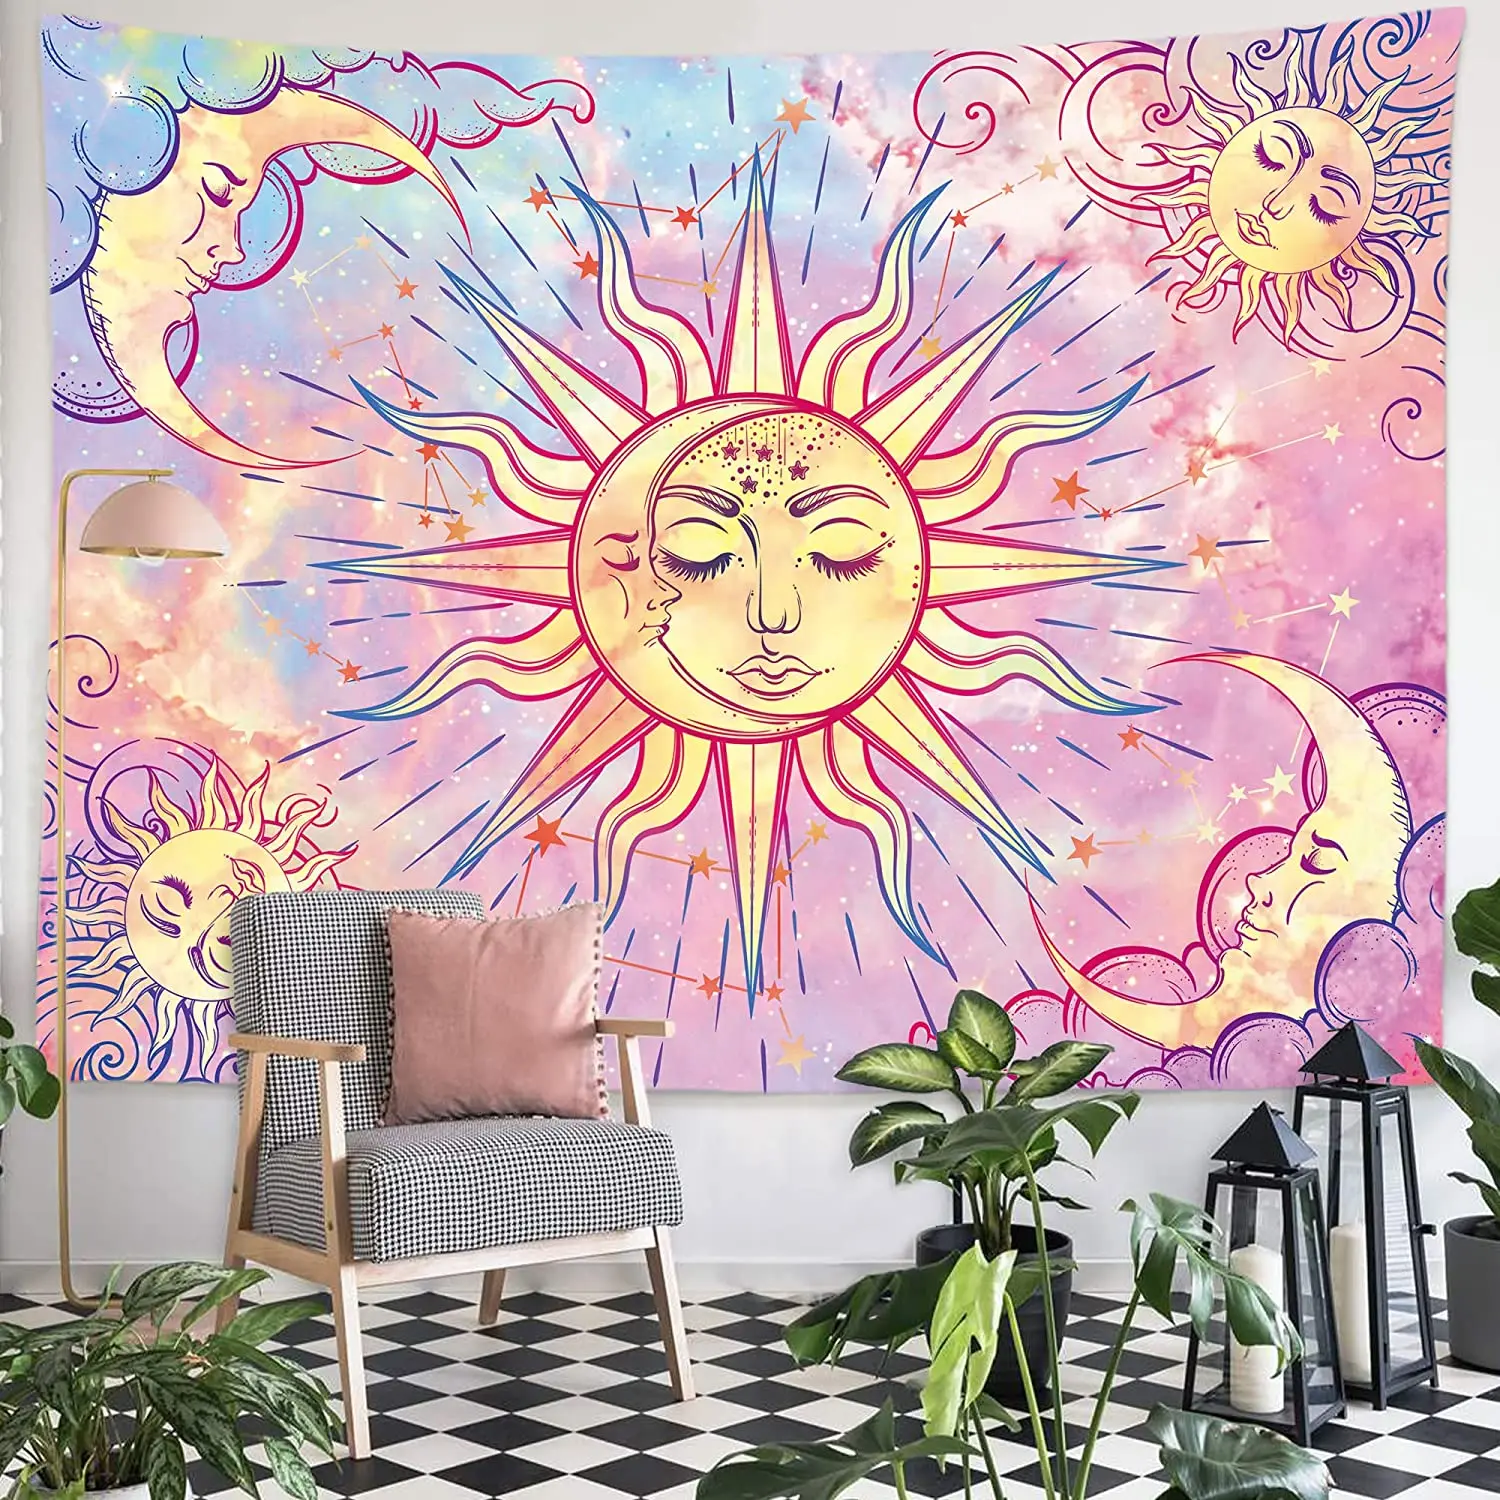 

Tapestry Mandala Hippie Bohemian Tapestries Wall Hanging Flower Psychedelic Tapestry Wall Hanging Indian Dorm Bedroom Decor